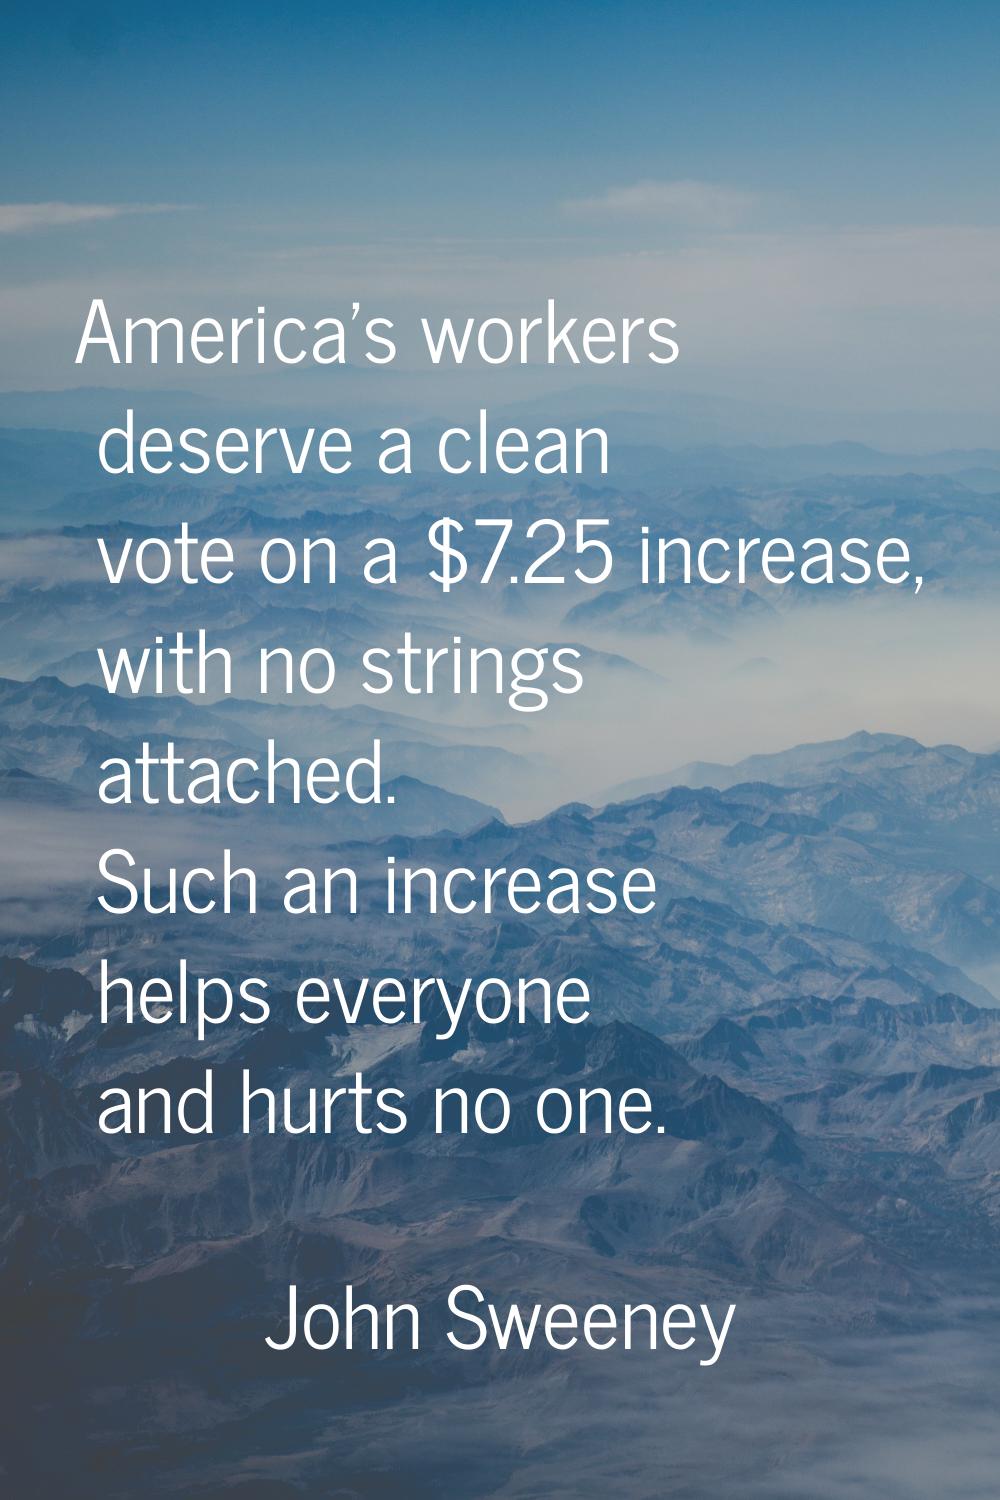 America's workers deserve a clean vote on a $7.25 increase, with no strings attached. Such an incre